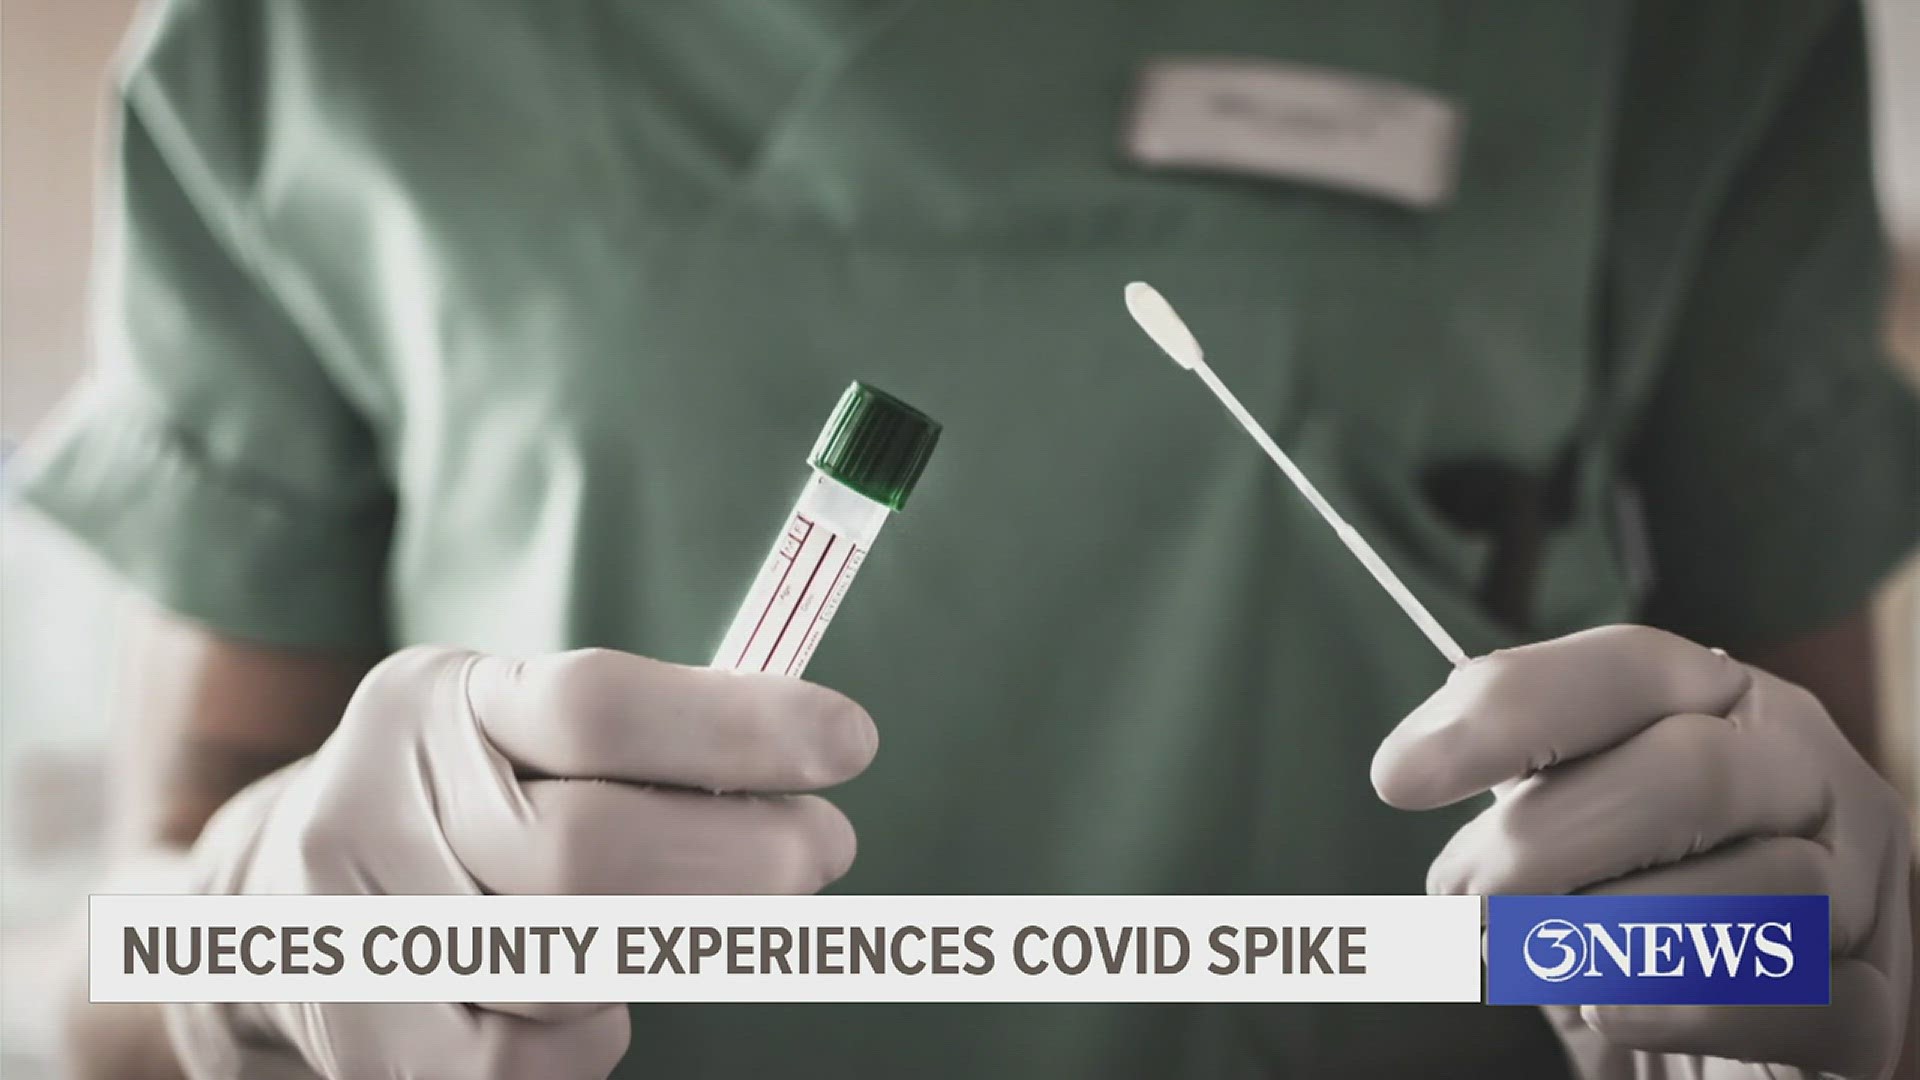 There were 179 new cases of COVID-19 in Nueces County last week, which is more than double previous weeks' numbers.